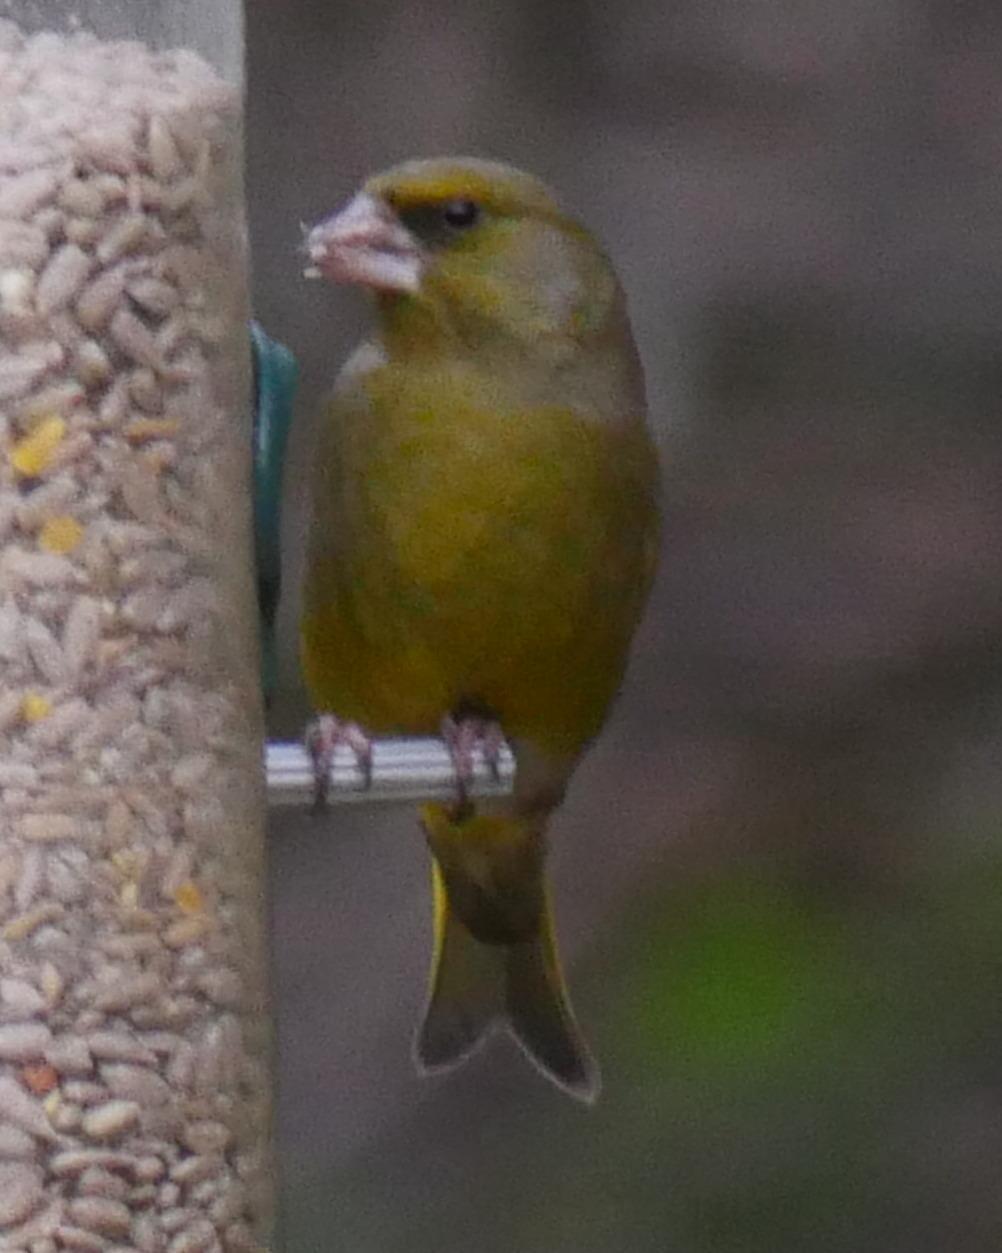 European Greenfinch Photo by Peter Lowe